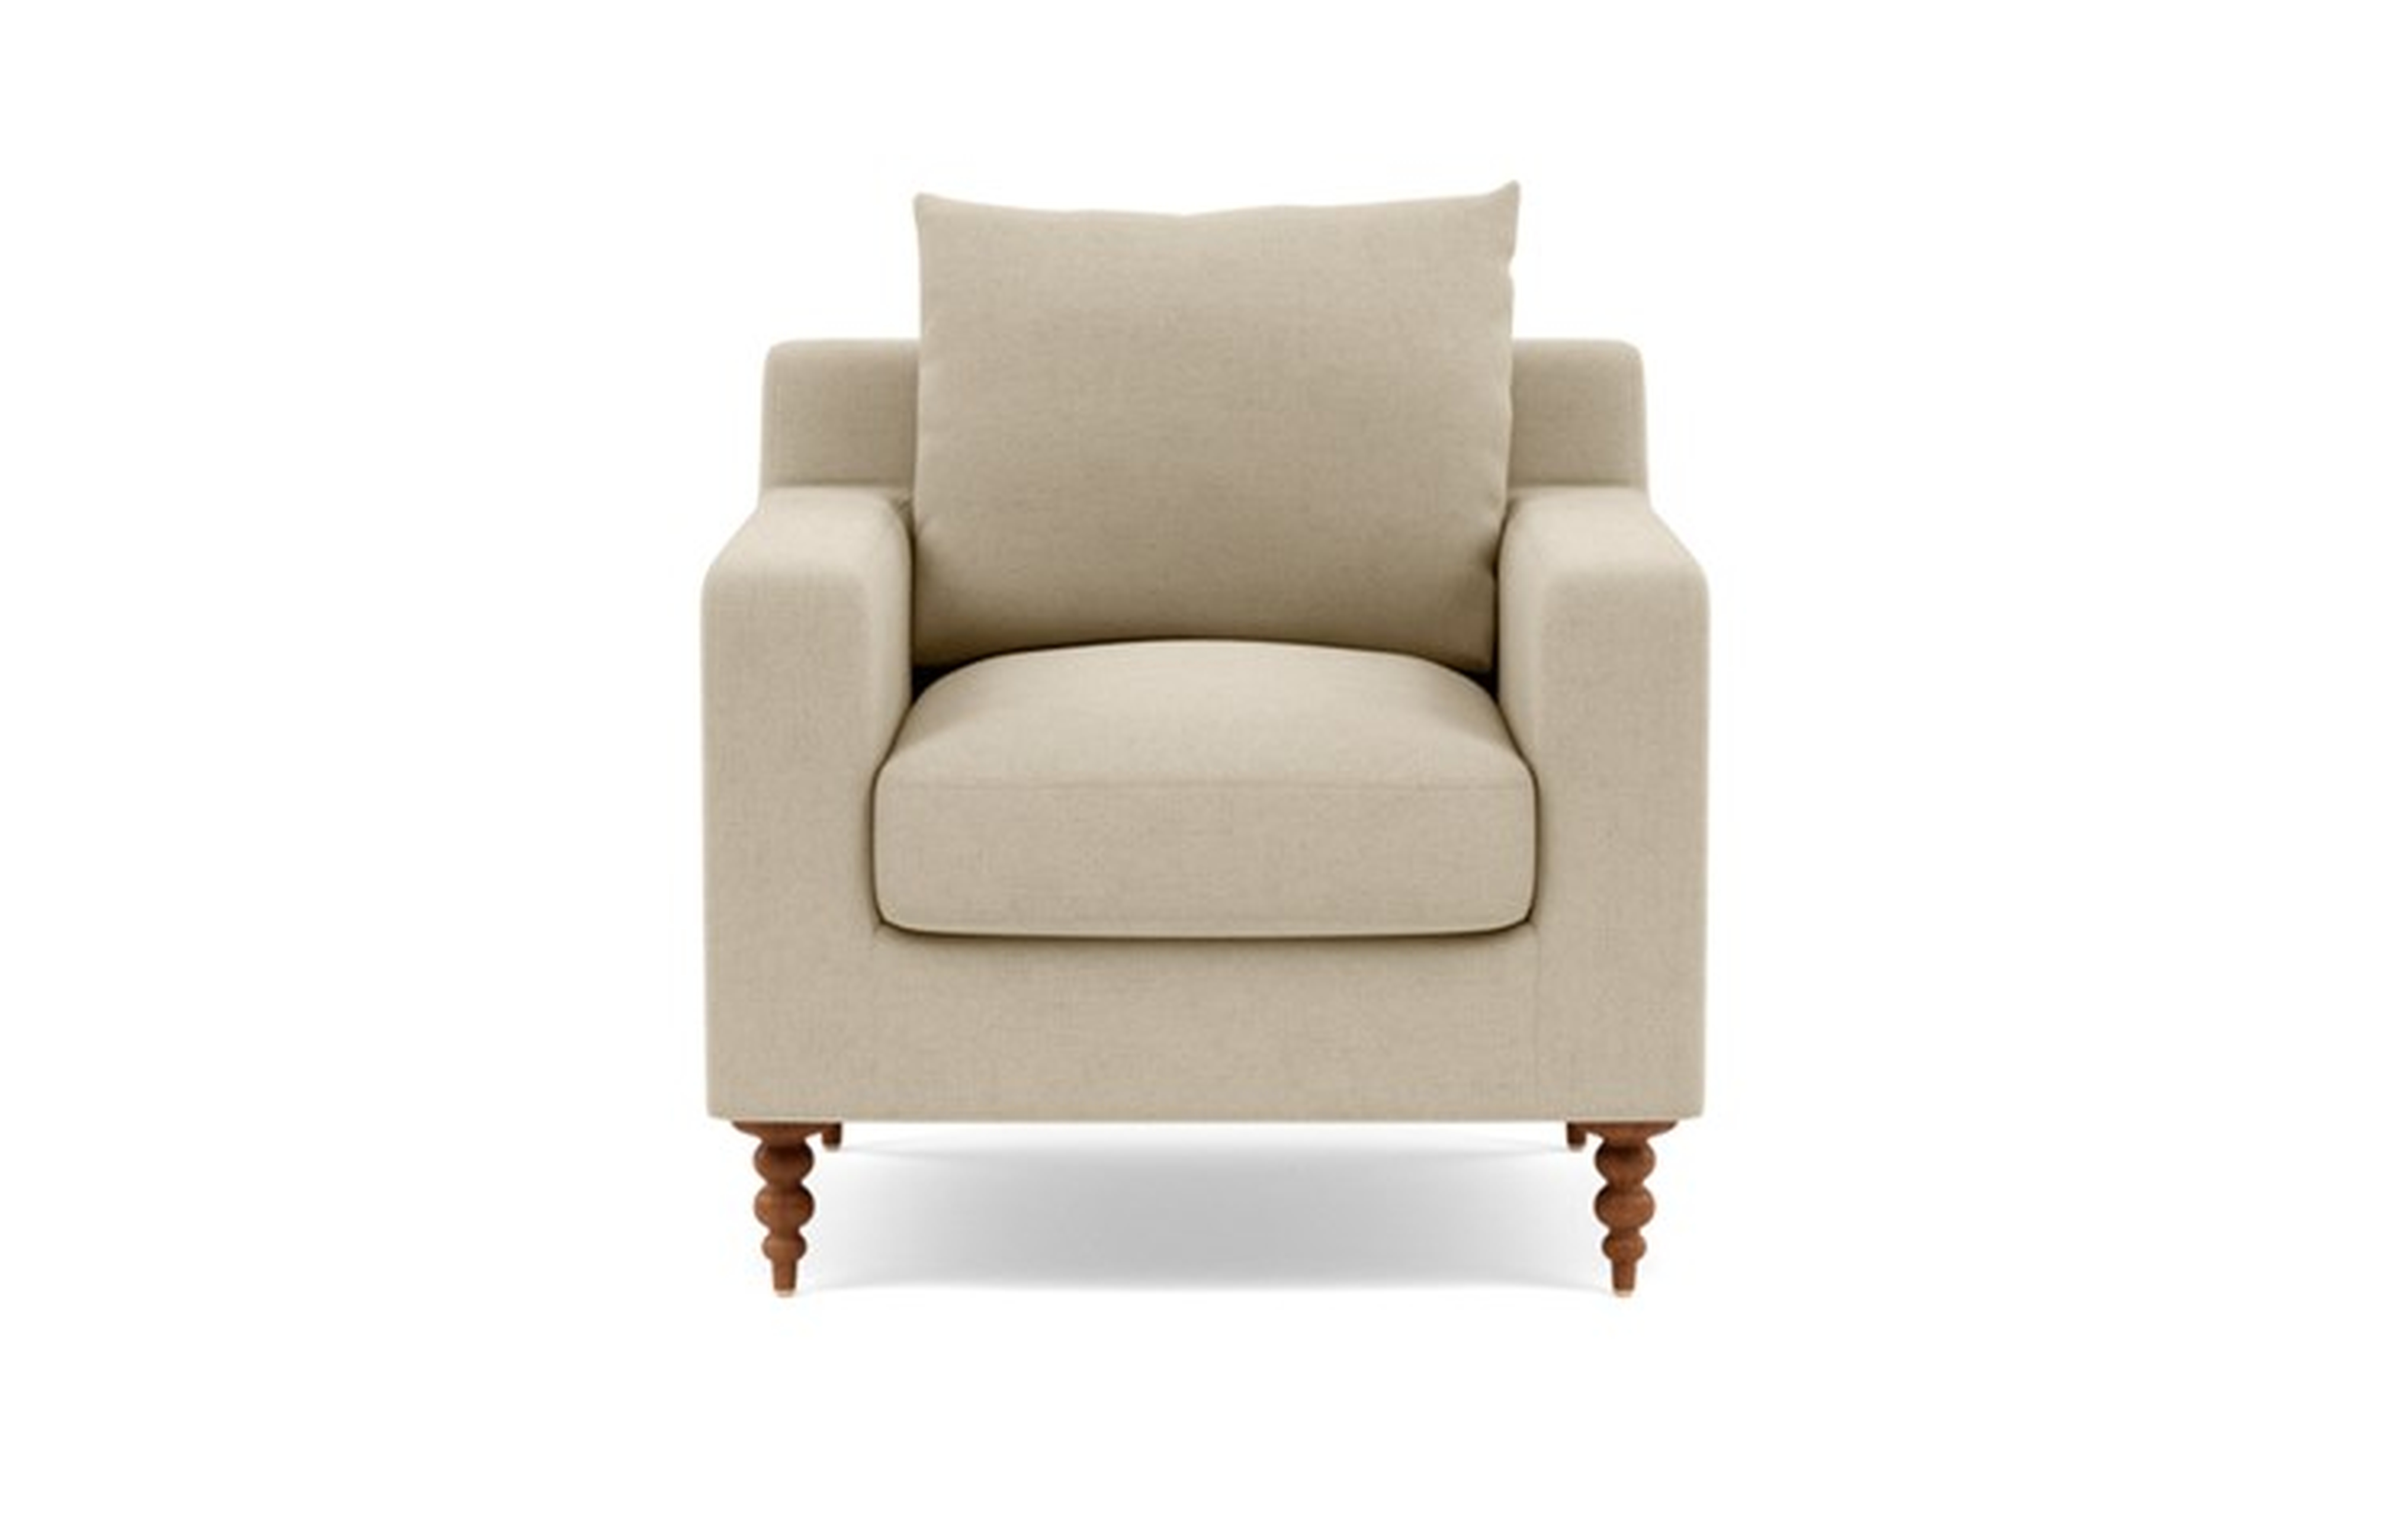 Sloan Petite Chair with Beige Oatmeal Fabric, down alternative cushions, and Oiled Walnut legs - Interior Define